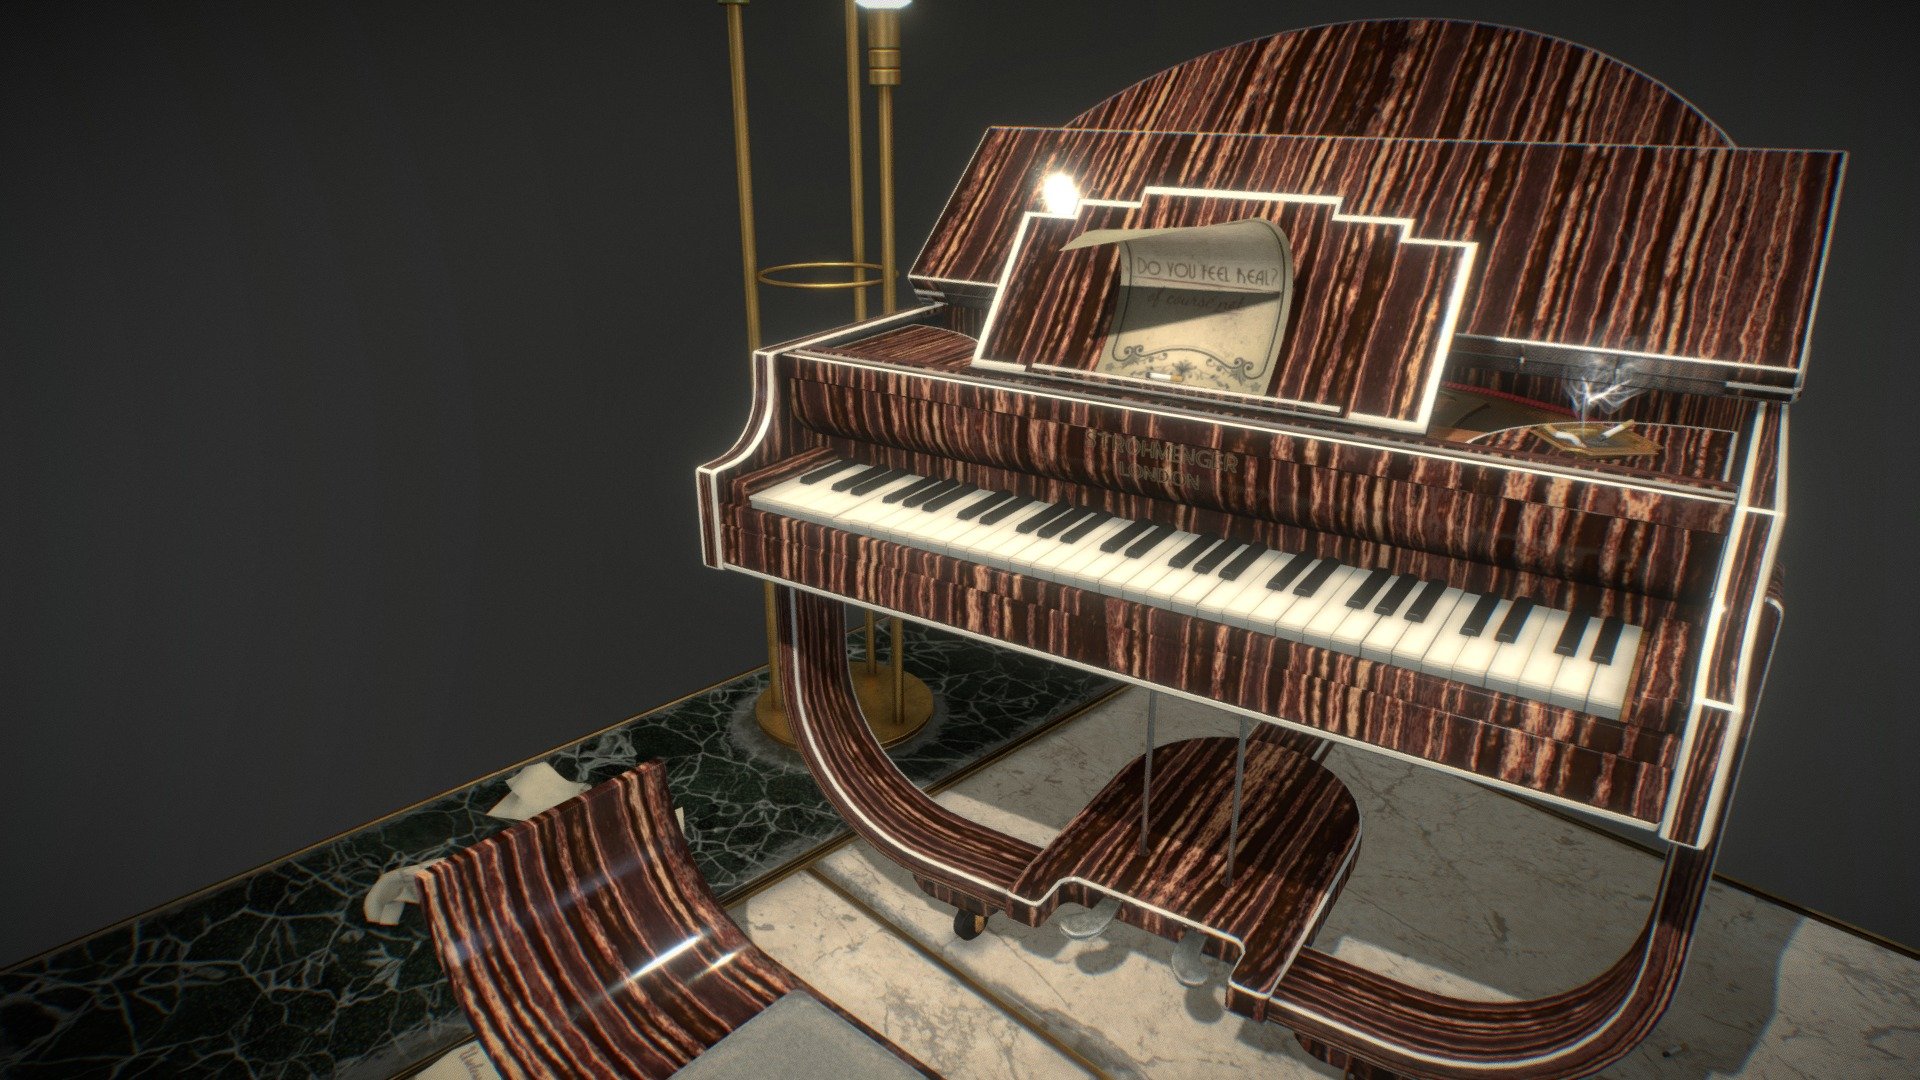 The Art Of Piano Ornamentation - Adding Beauty To An Instrument